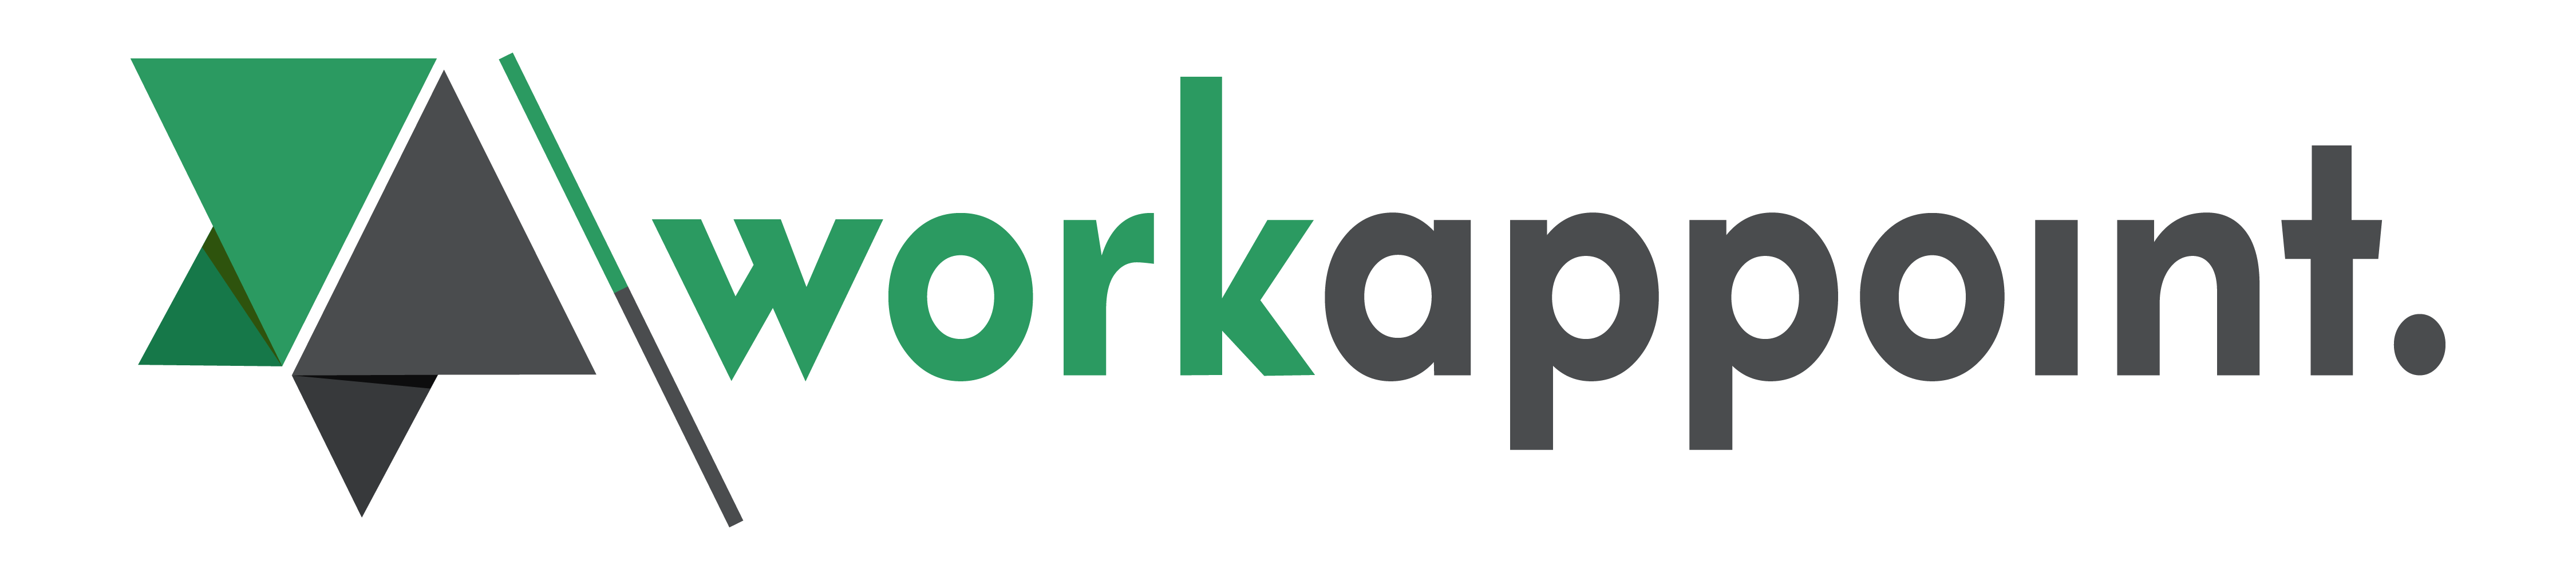 WorkAppoint